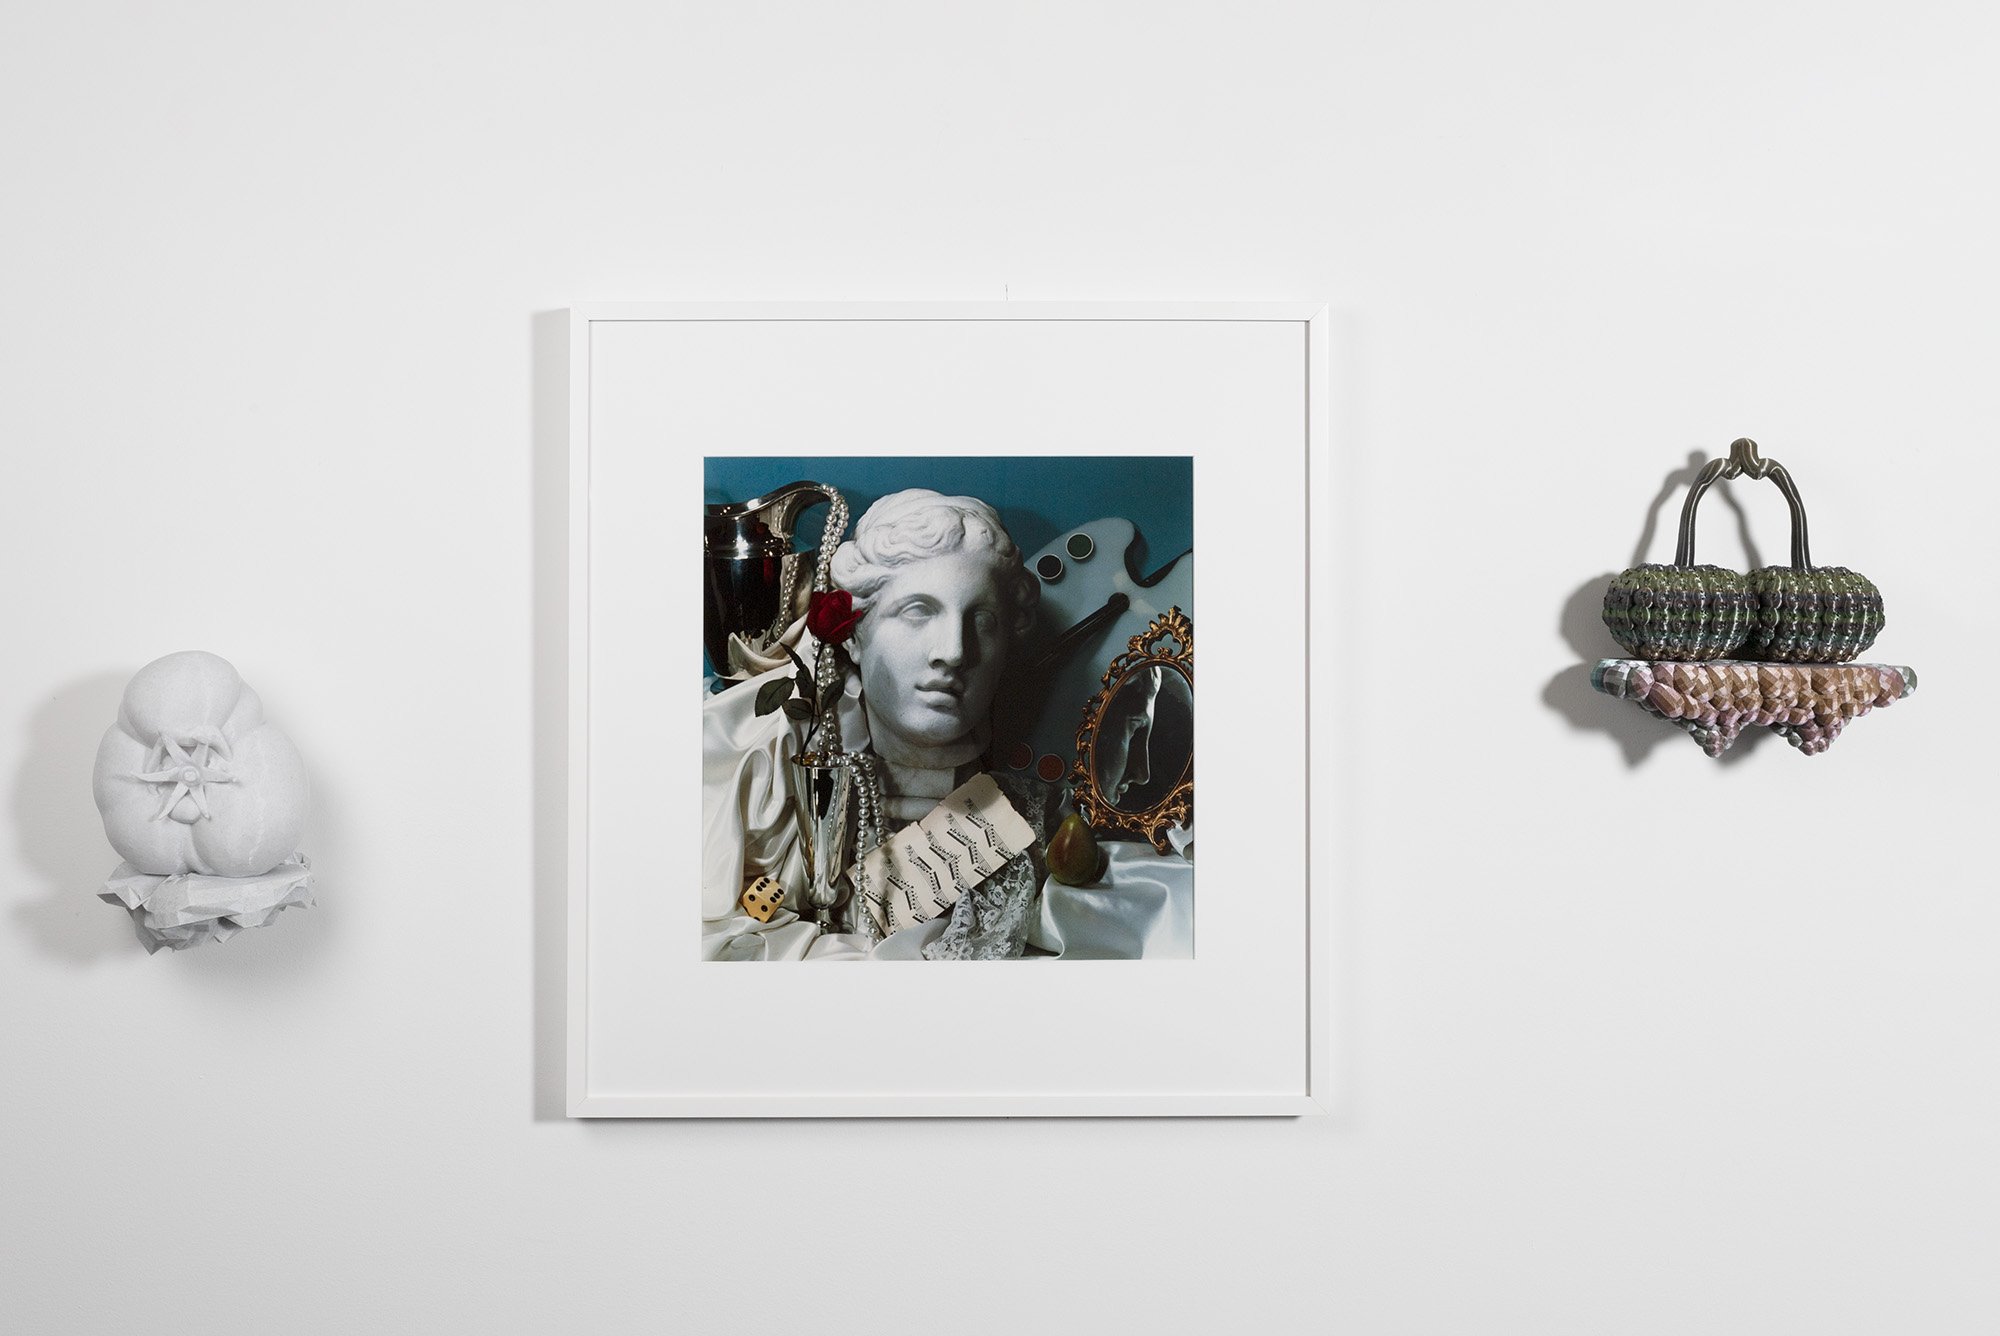 3d printed sculptures and framed photographs